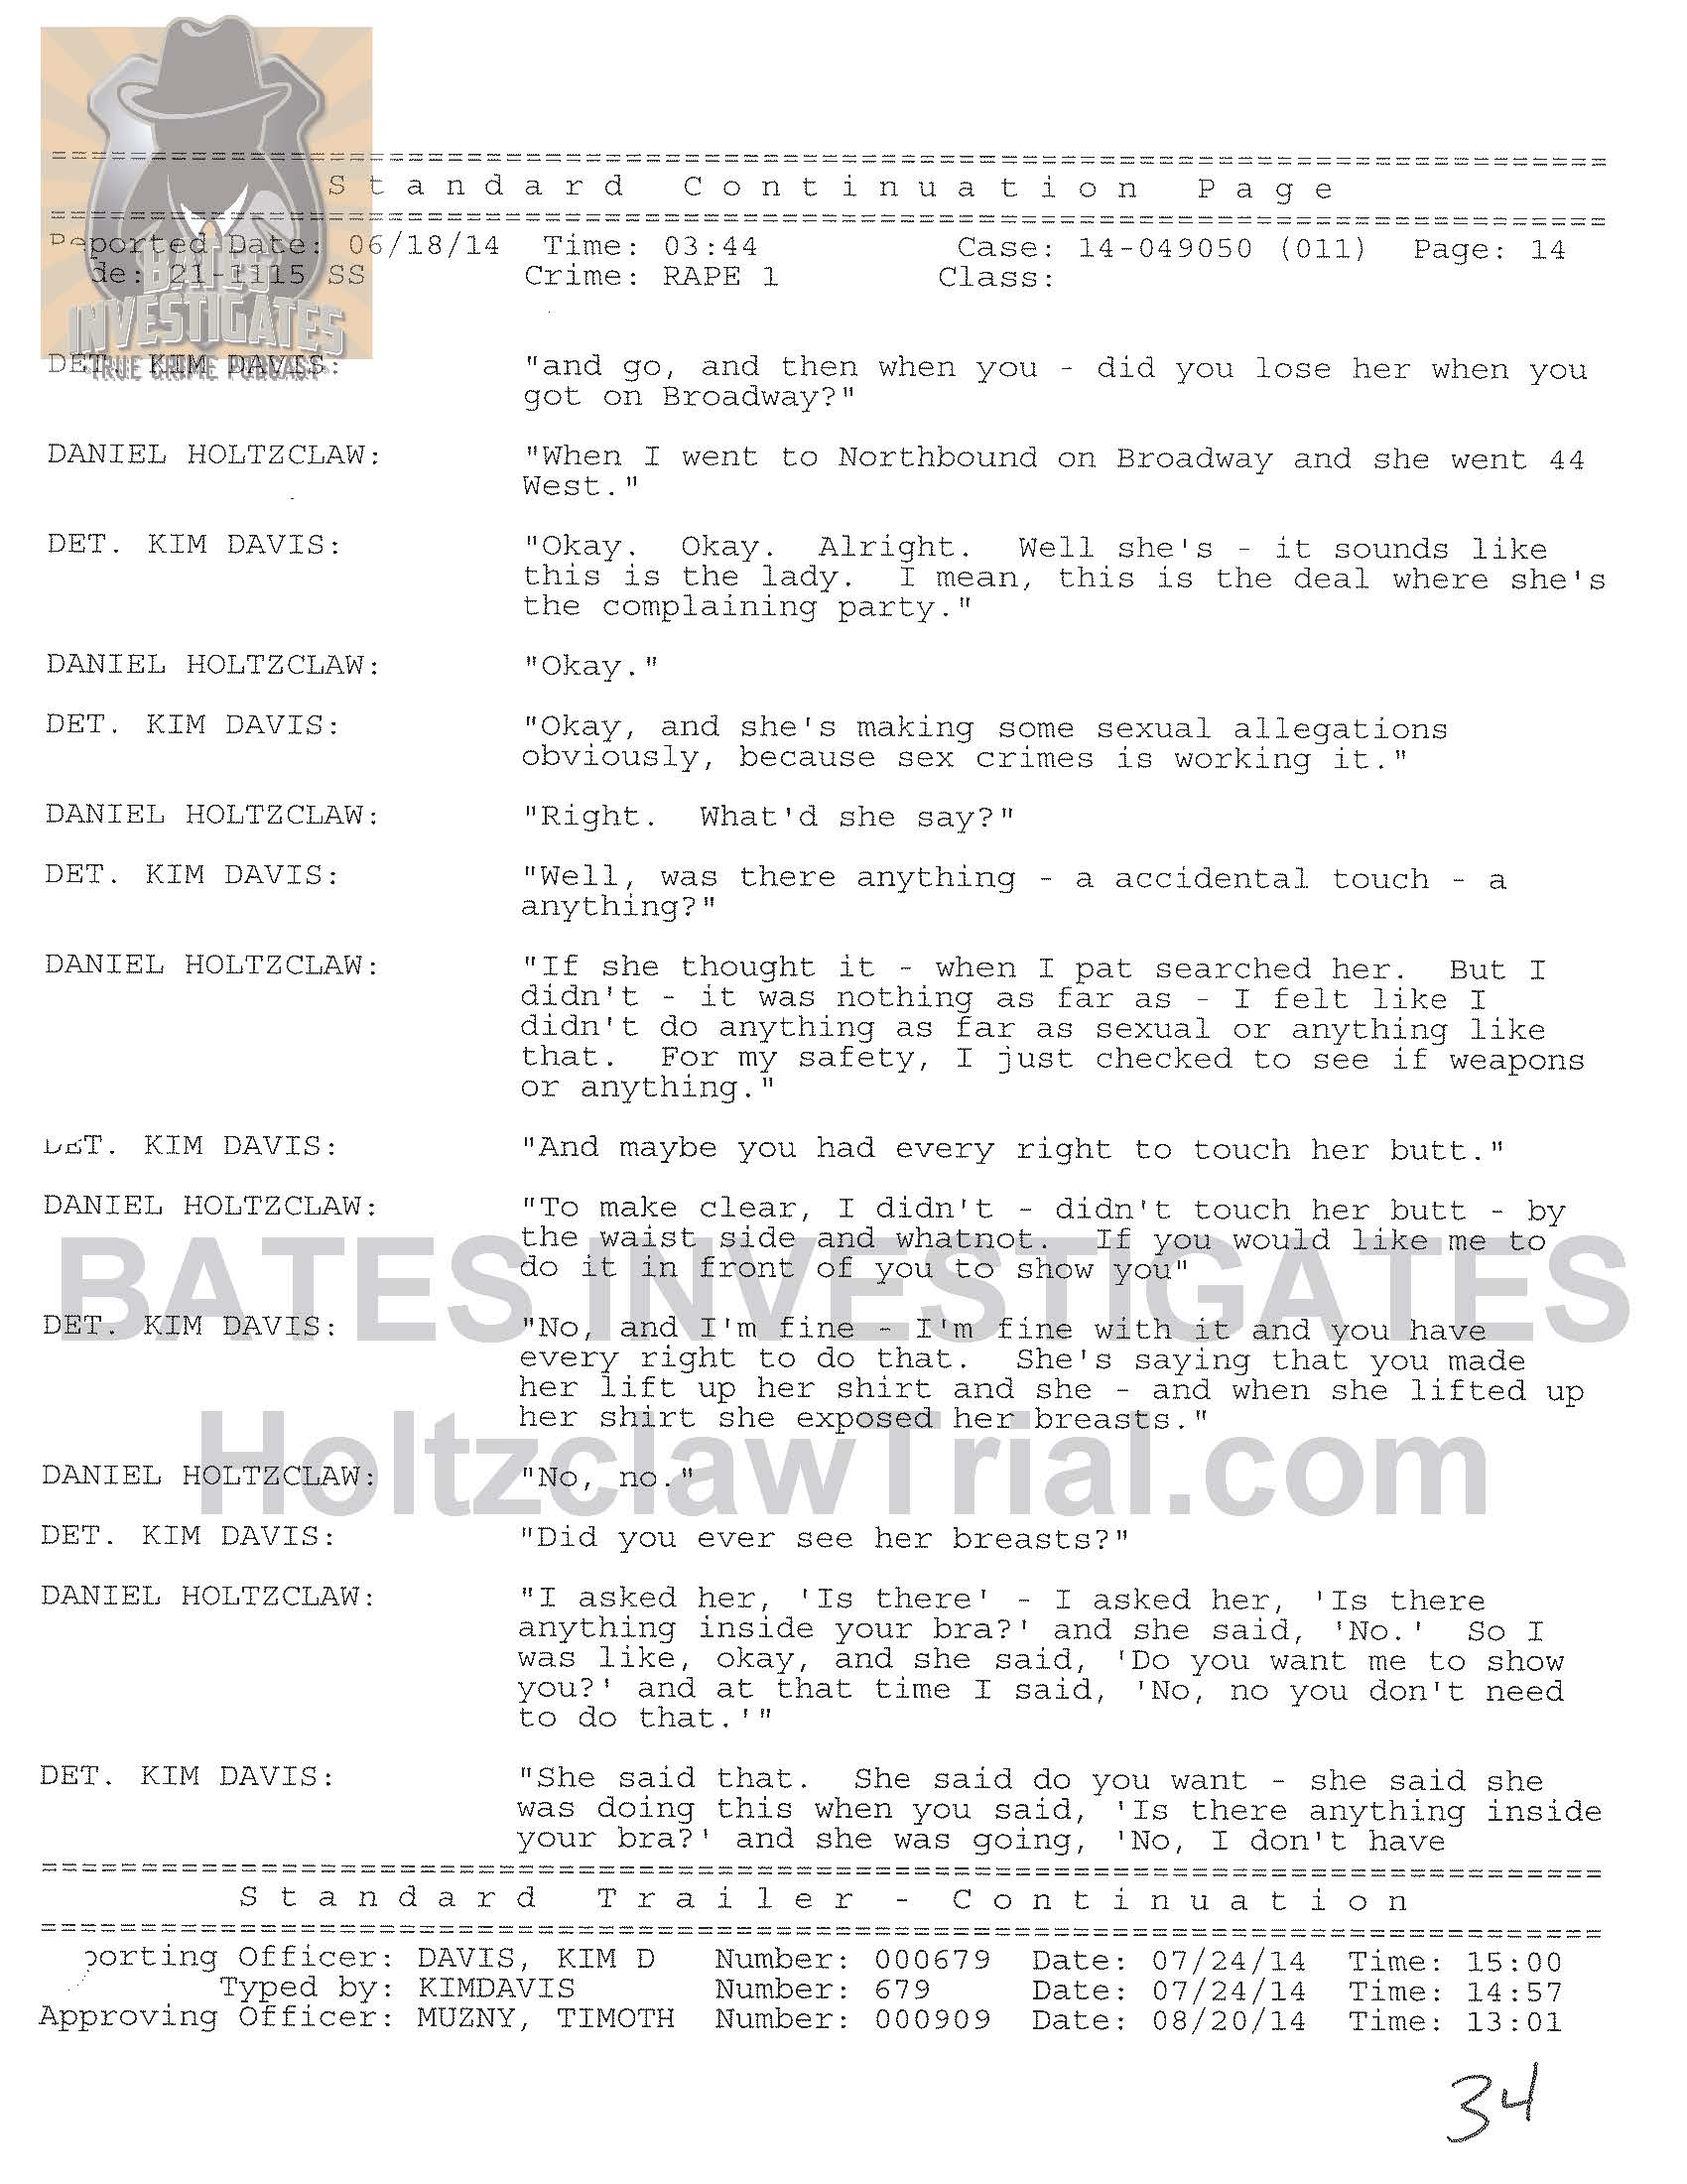 Holtzclaw Interrogation Transcript - Ep02 Redacted_Page_14.jpg